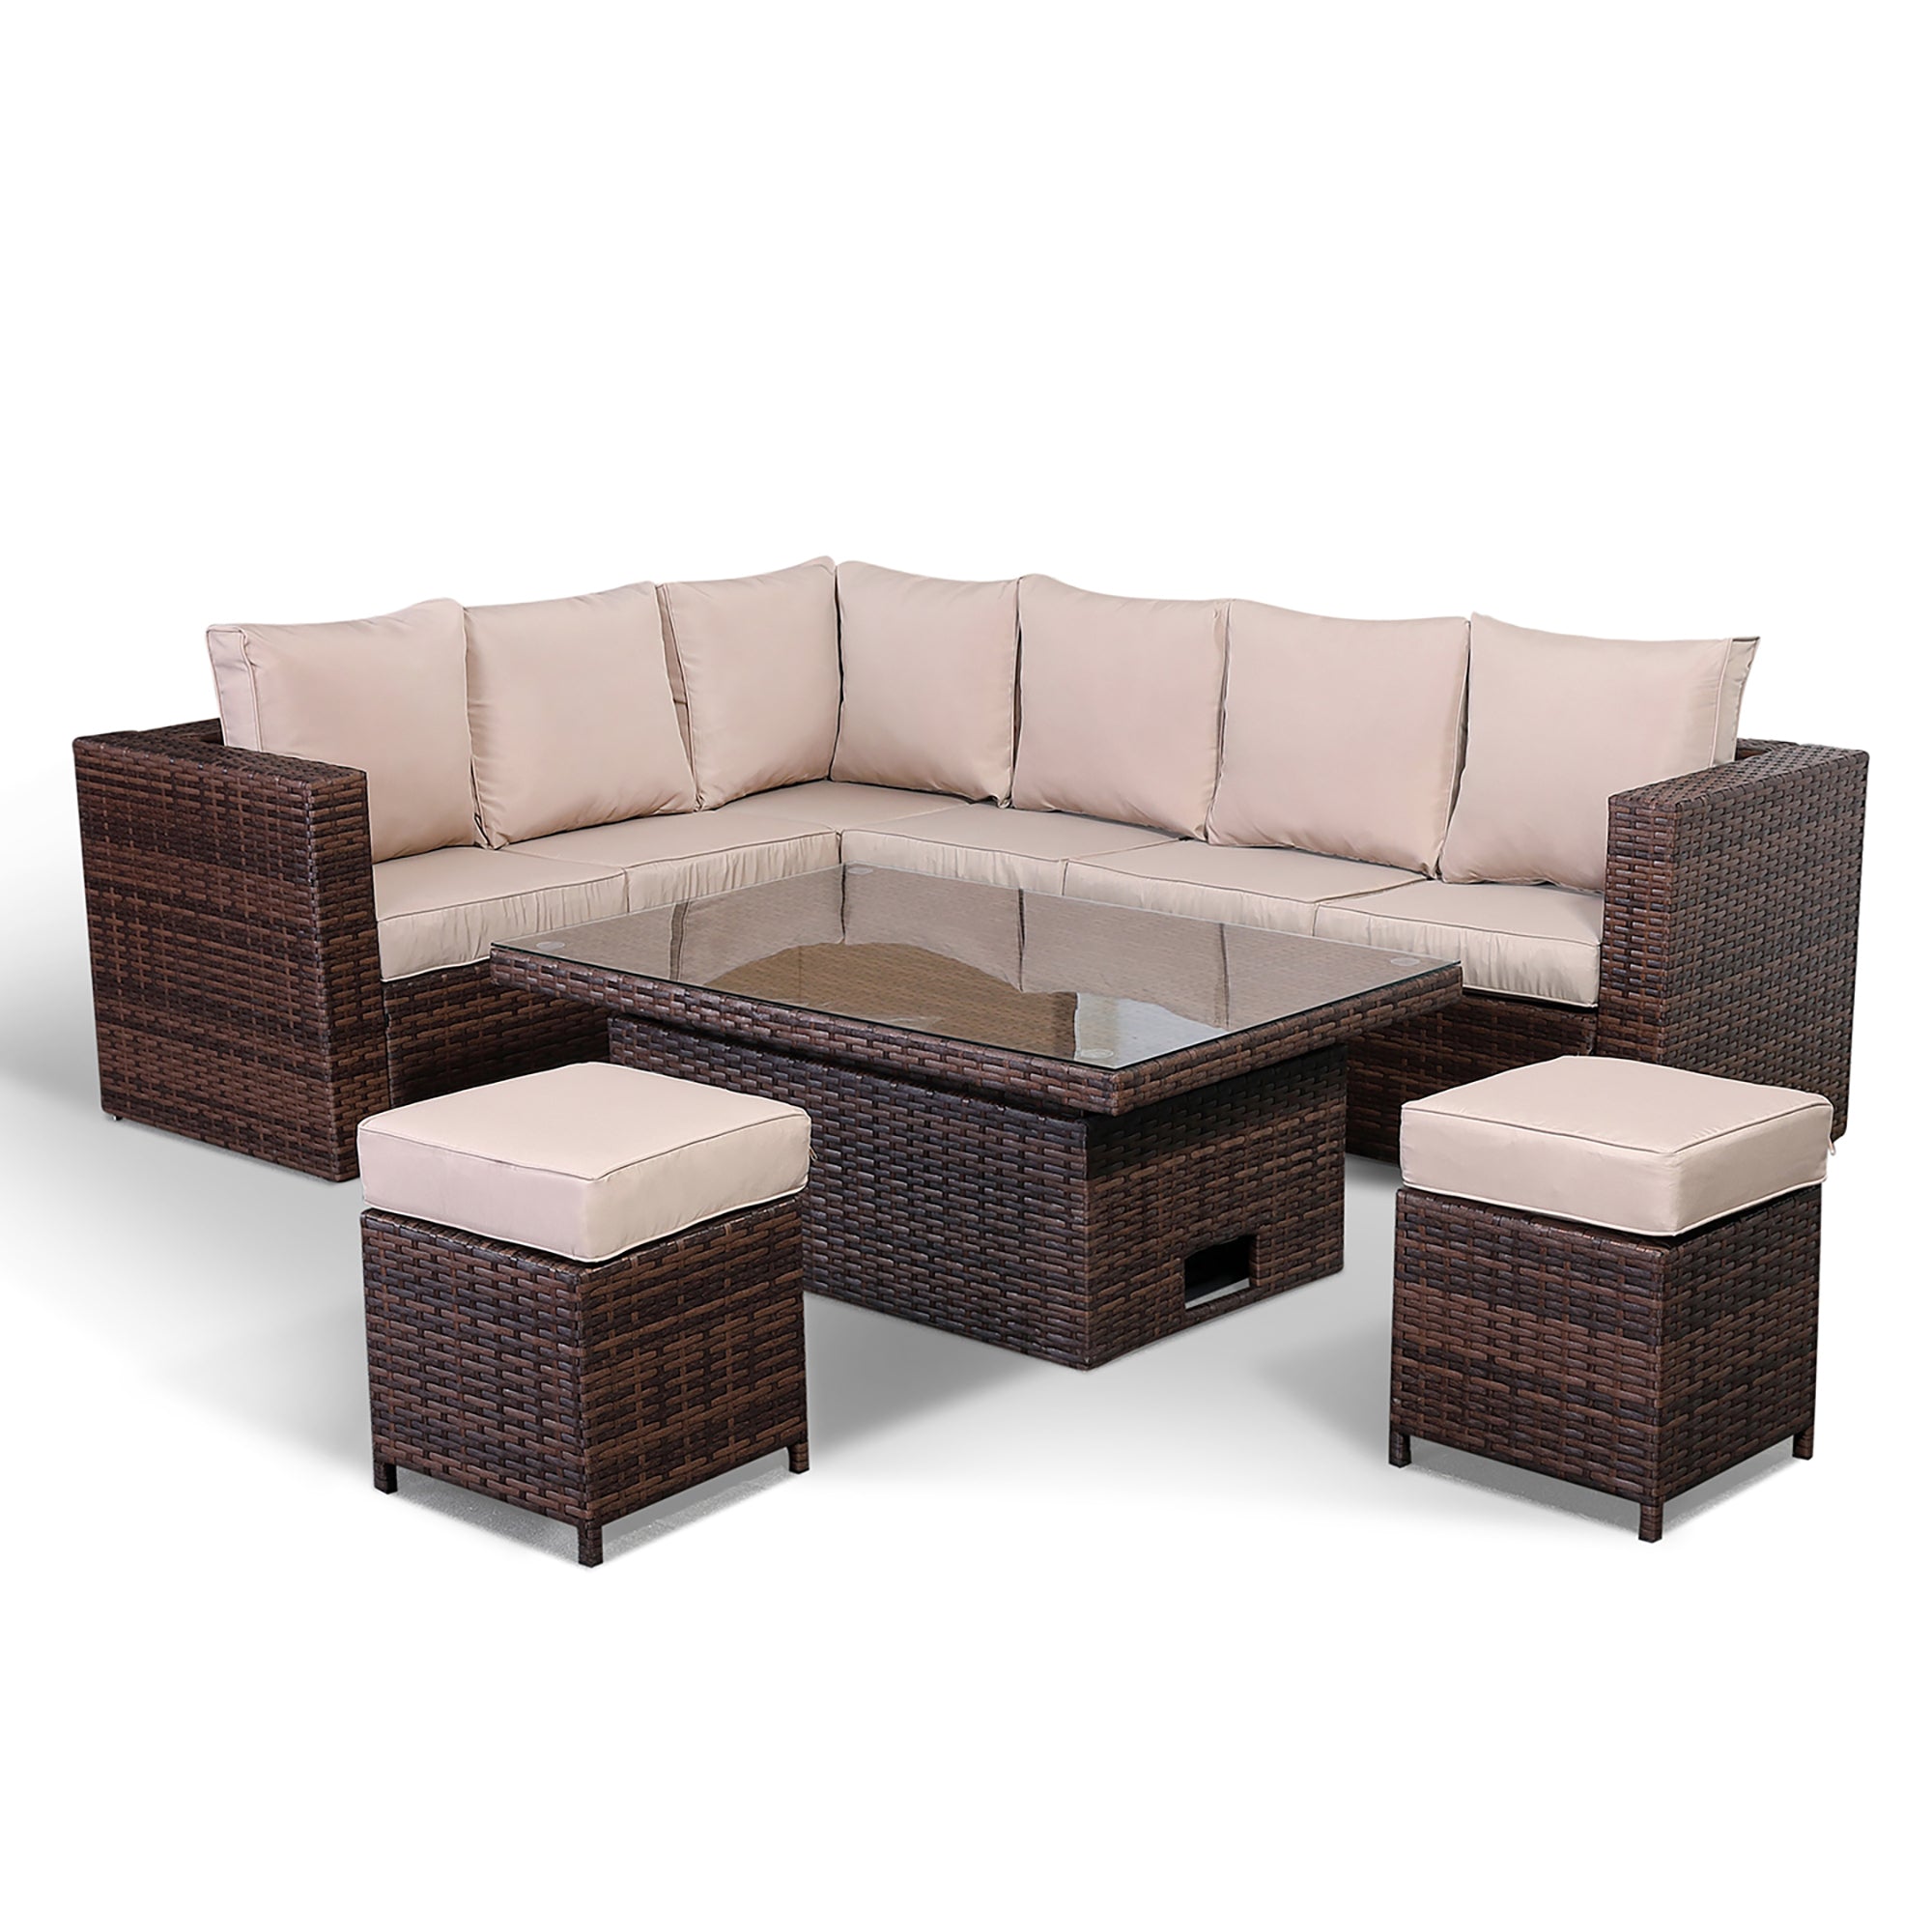 F3..Lily Range Left Hand Large Corner Set with Rising table and 2 Stools